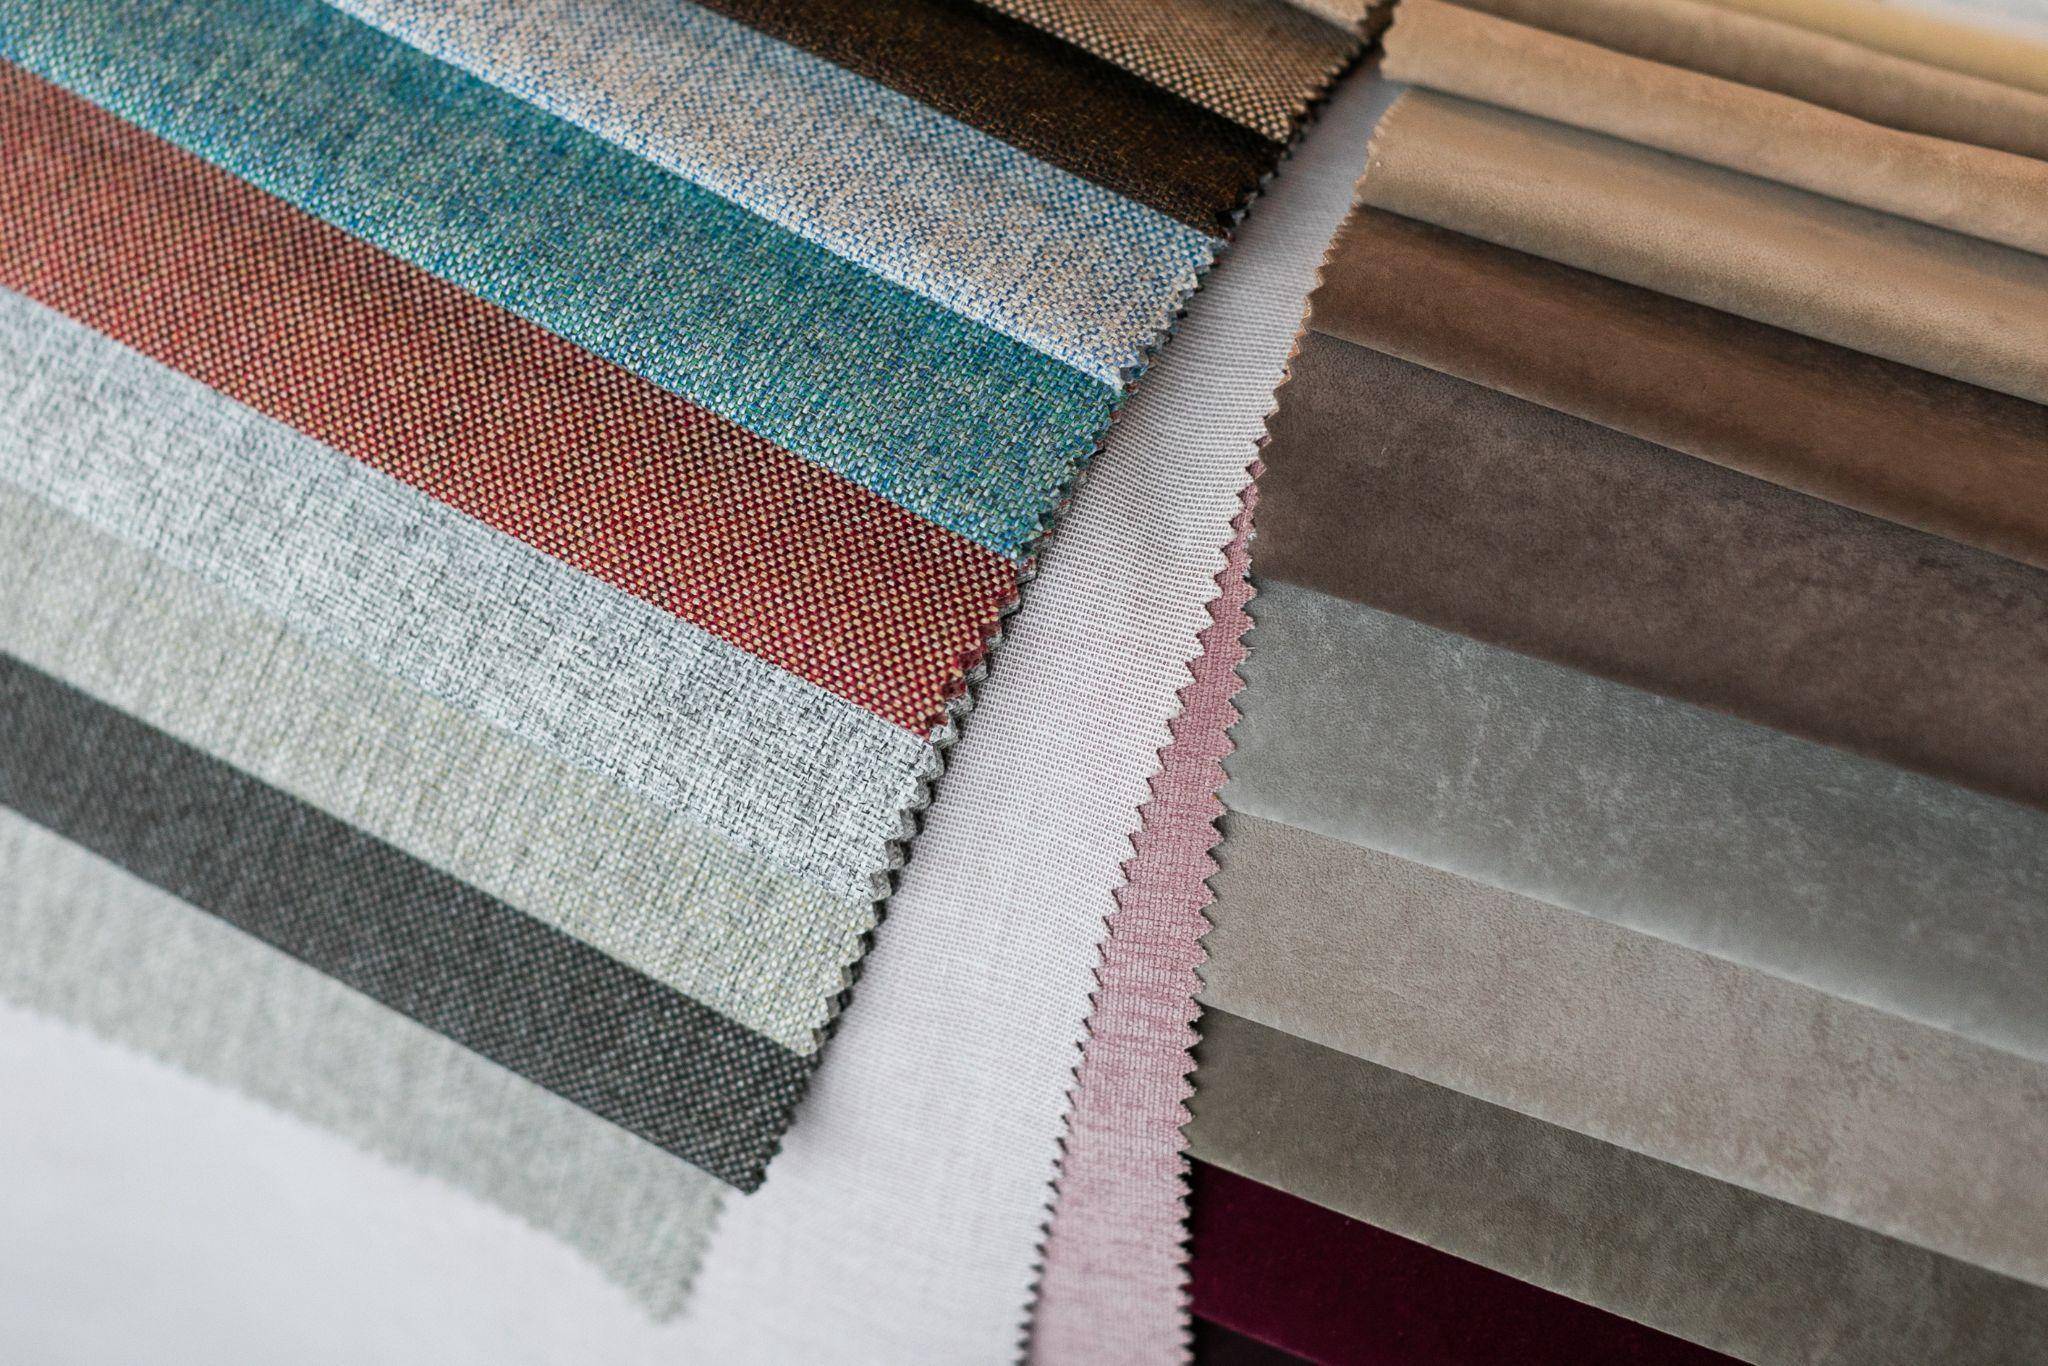 Multicolored fabric stripes in the interior catalog of upholstered furniture